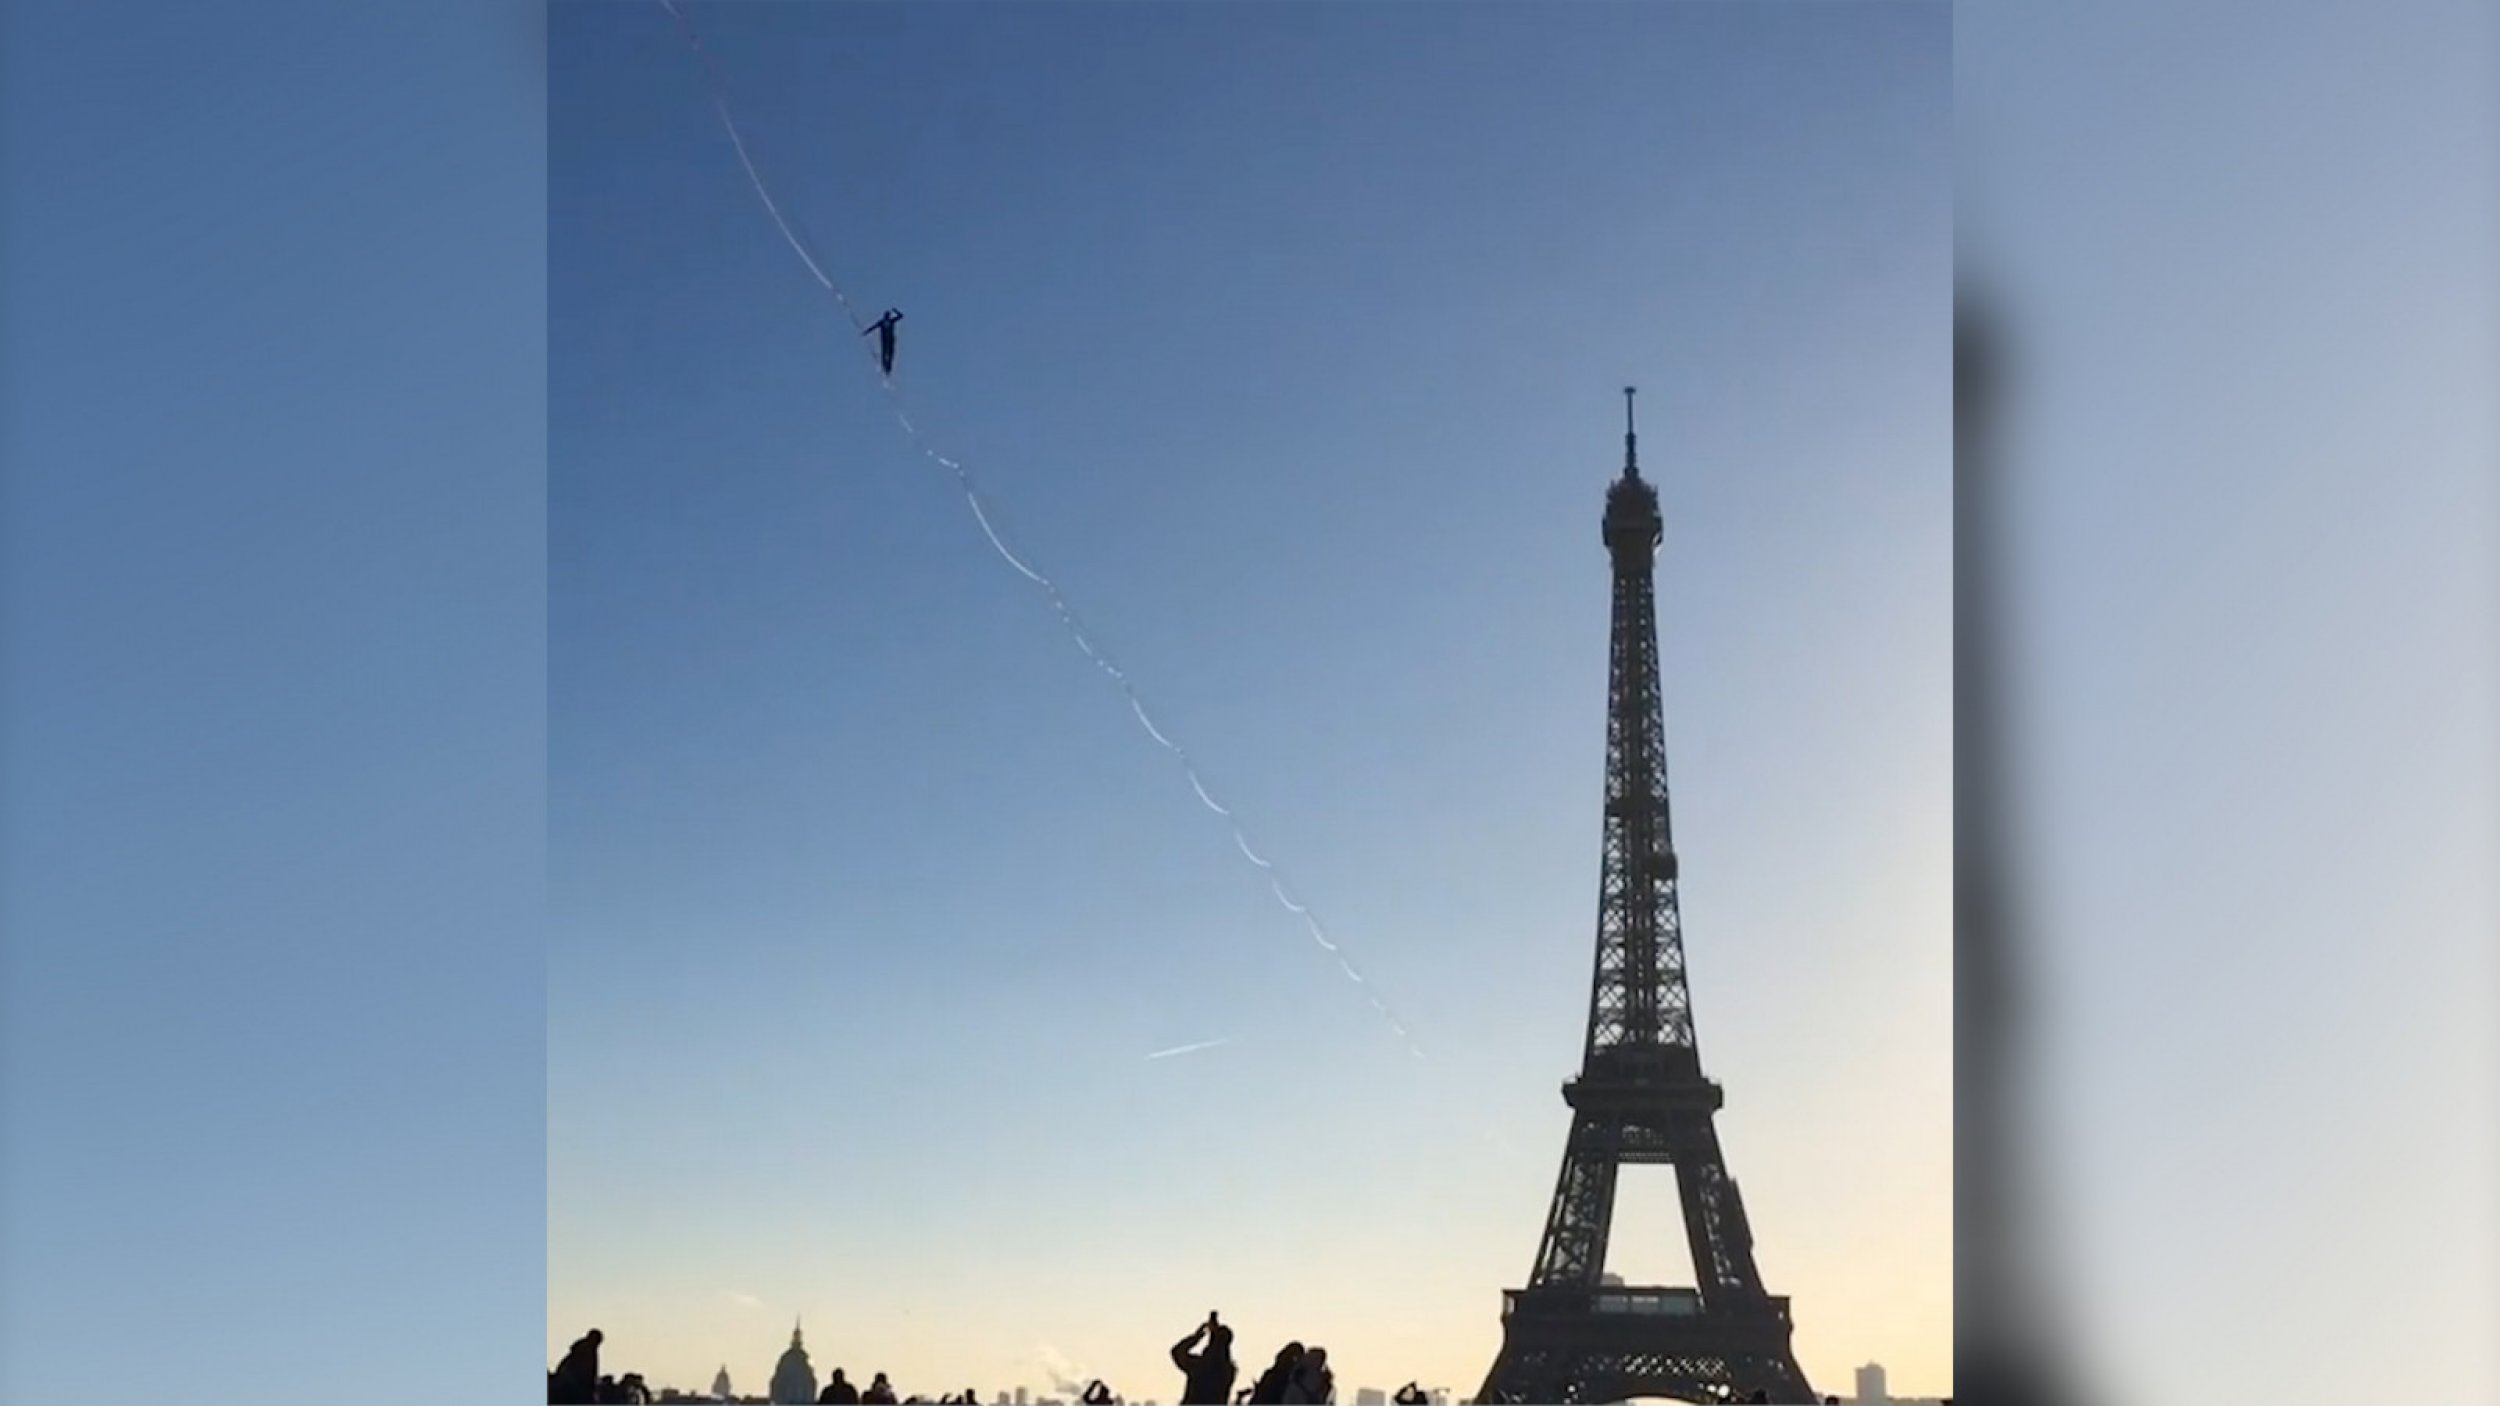 This Daredevil Walks 60 Meters Above Ground To Eiffel Tower